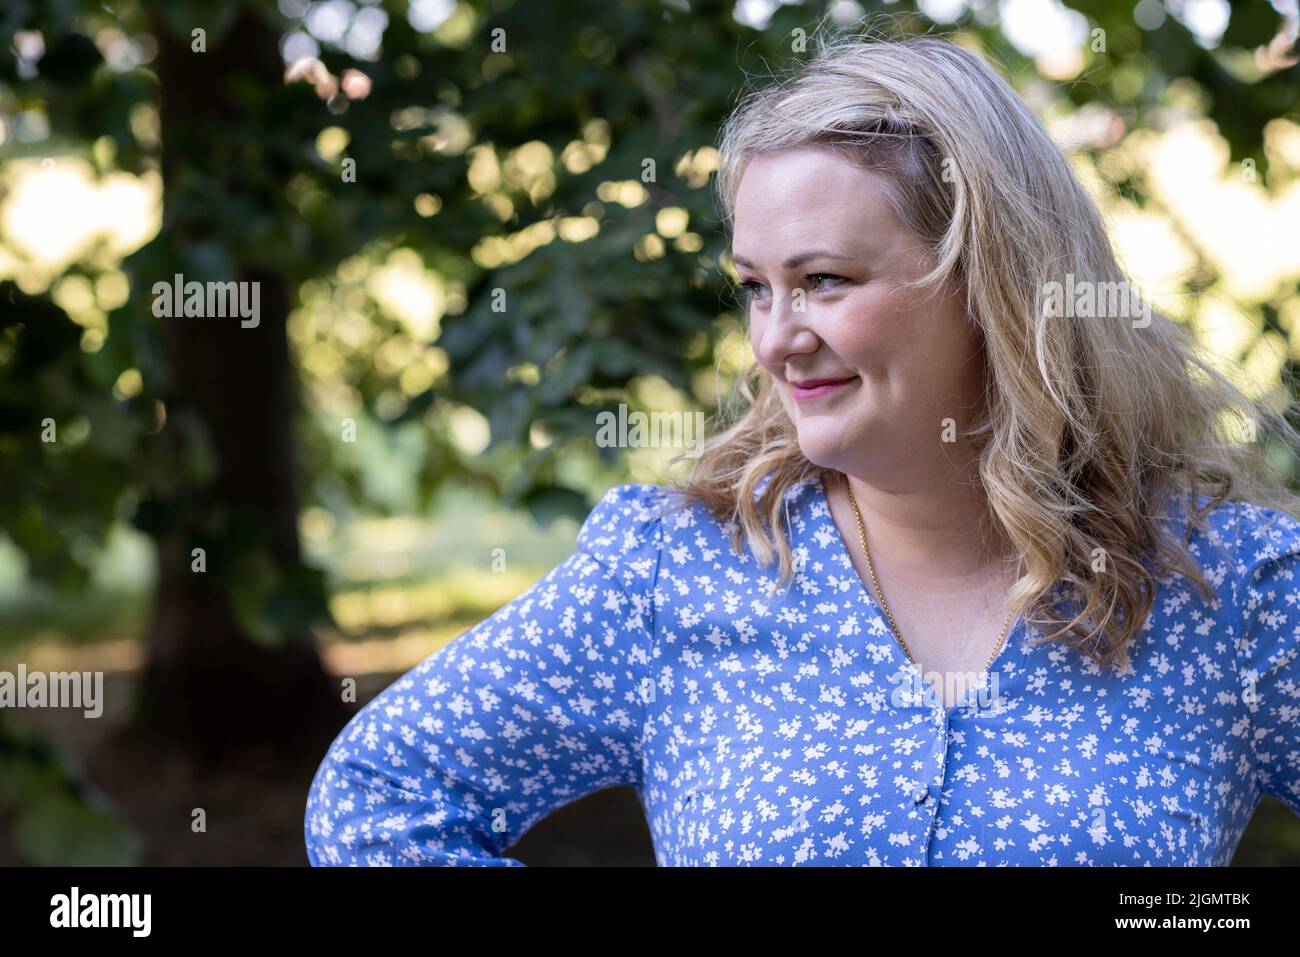 Actress and Writer Philippa Dunne known for The Nevers (2021), This Is Going to Hurt (2022) and The Bright Side (2020), Motherland, Derry Girls She is Stock Photo